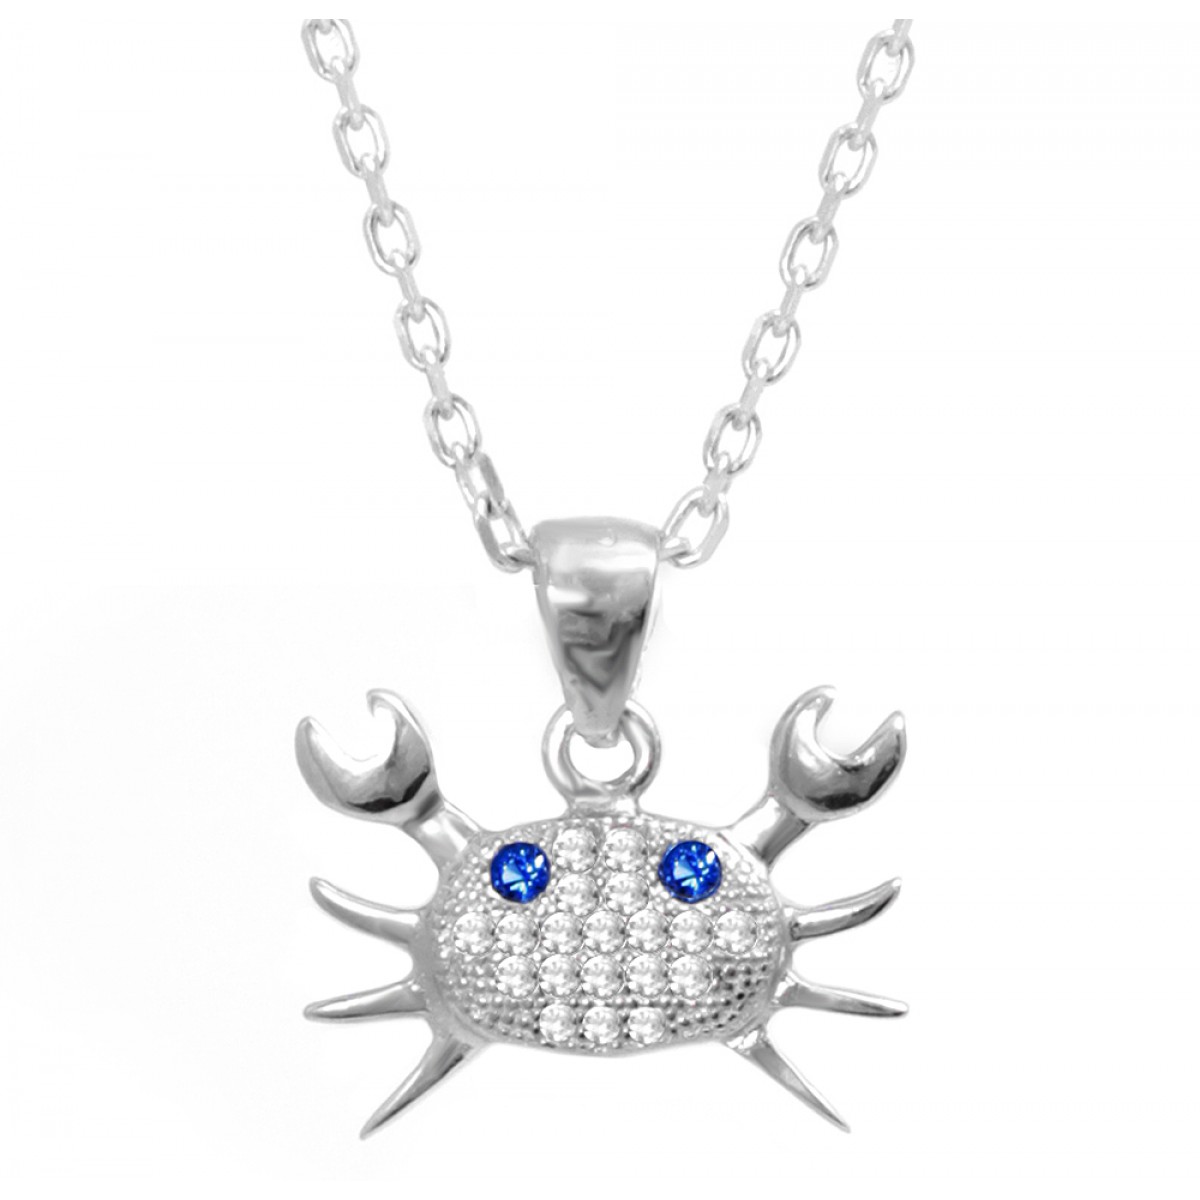 Buy Good Luck Protection Sea Life Charm - Crab Pendant Necklace ...